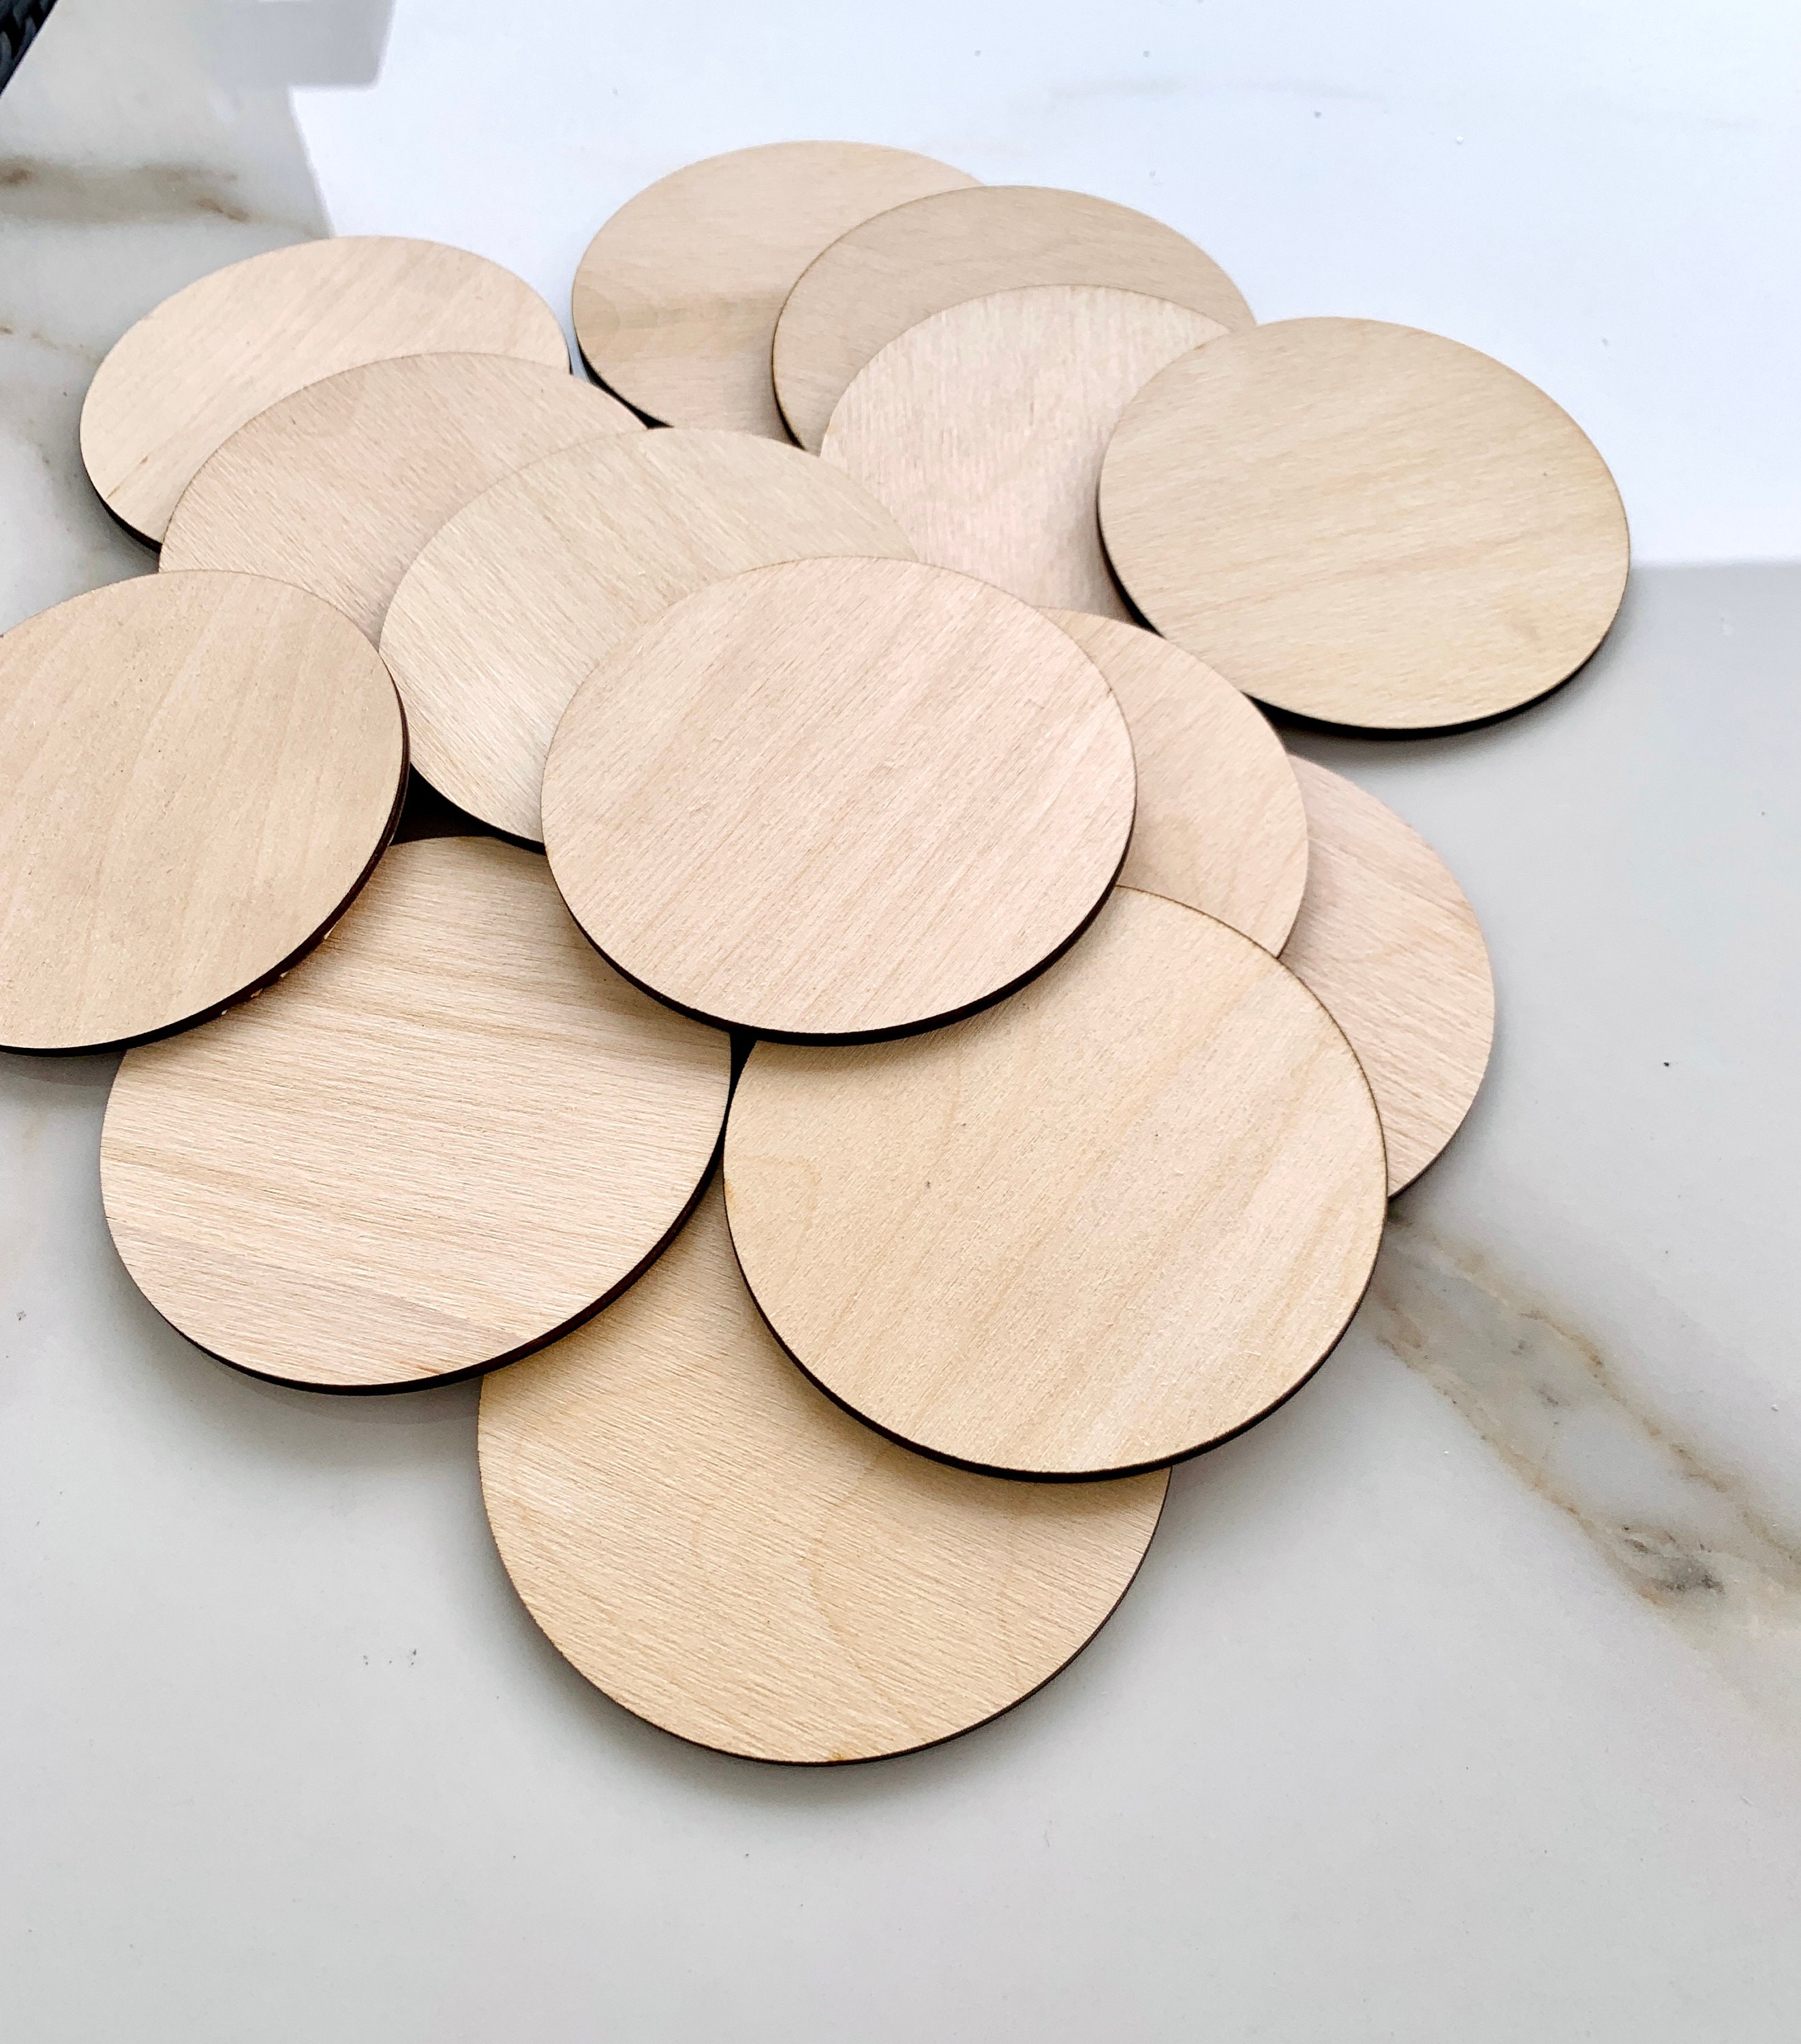 10Pcs Unfinished Wood Coasters, Blank Wooden Coasters with Non